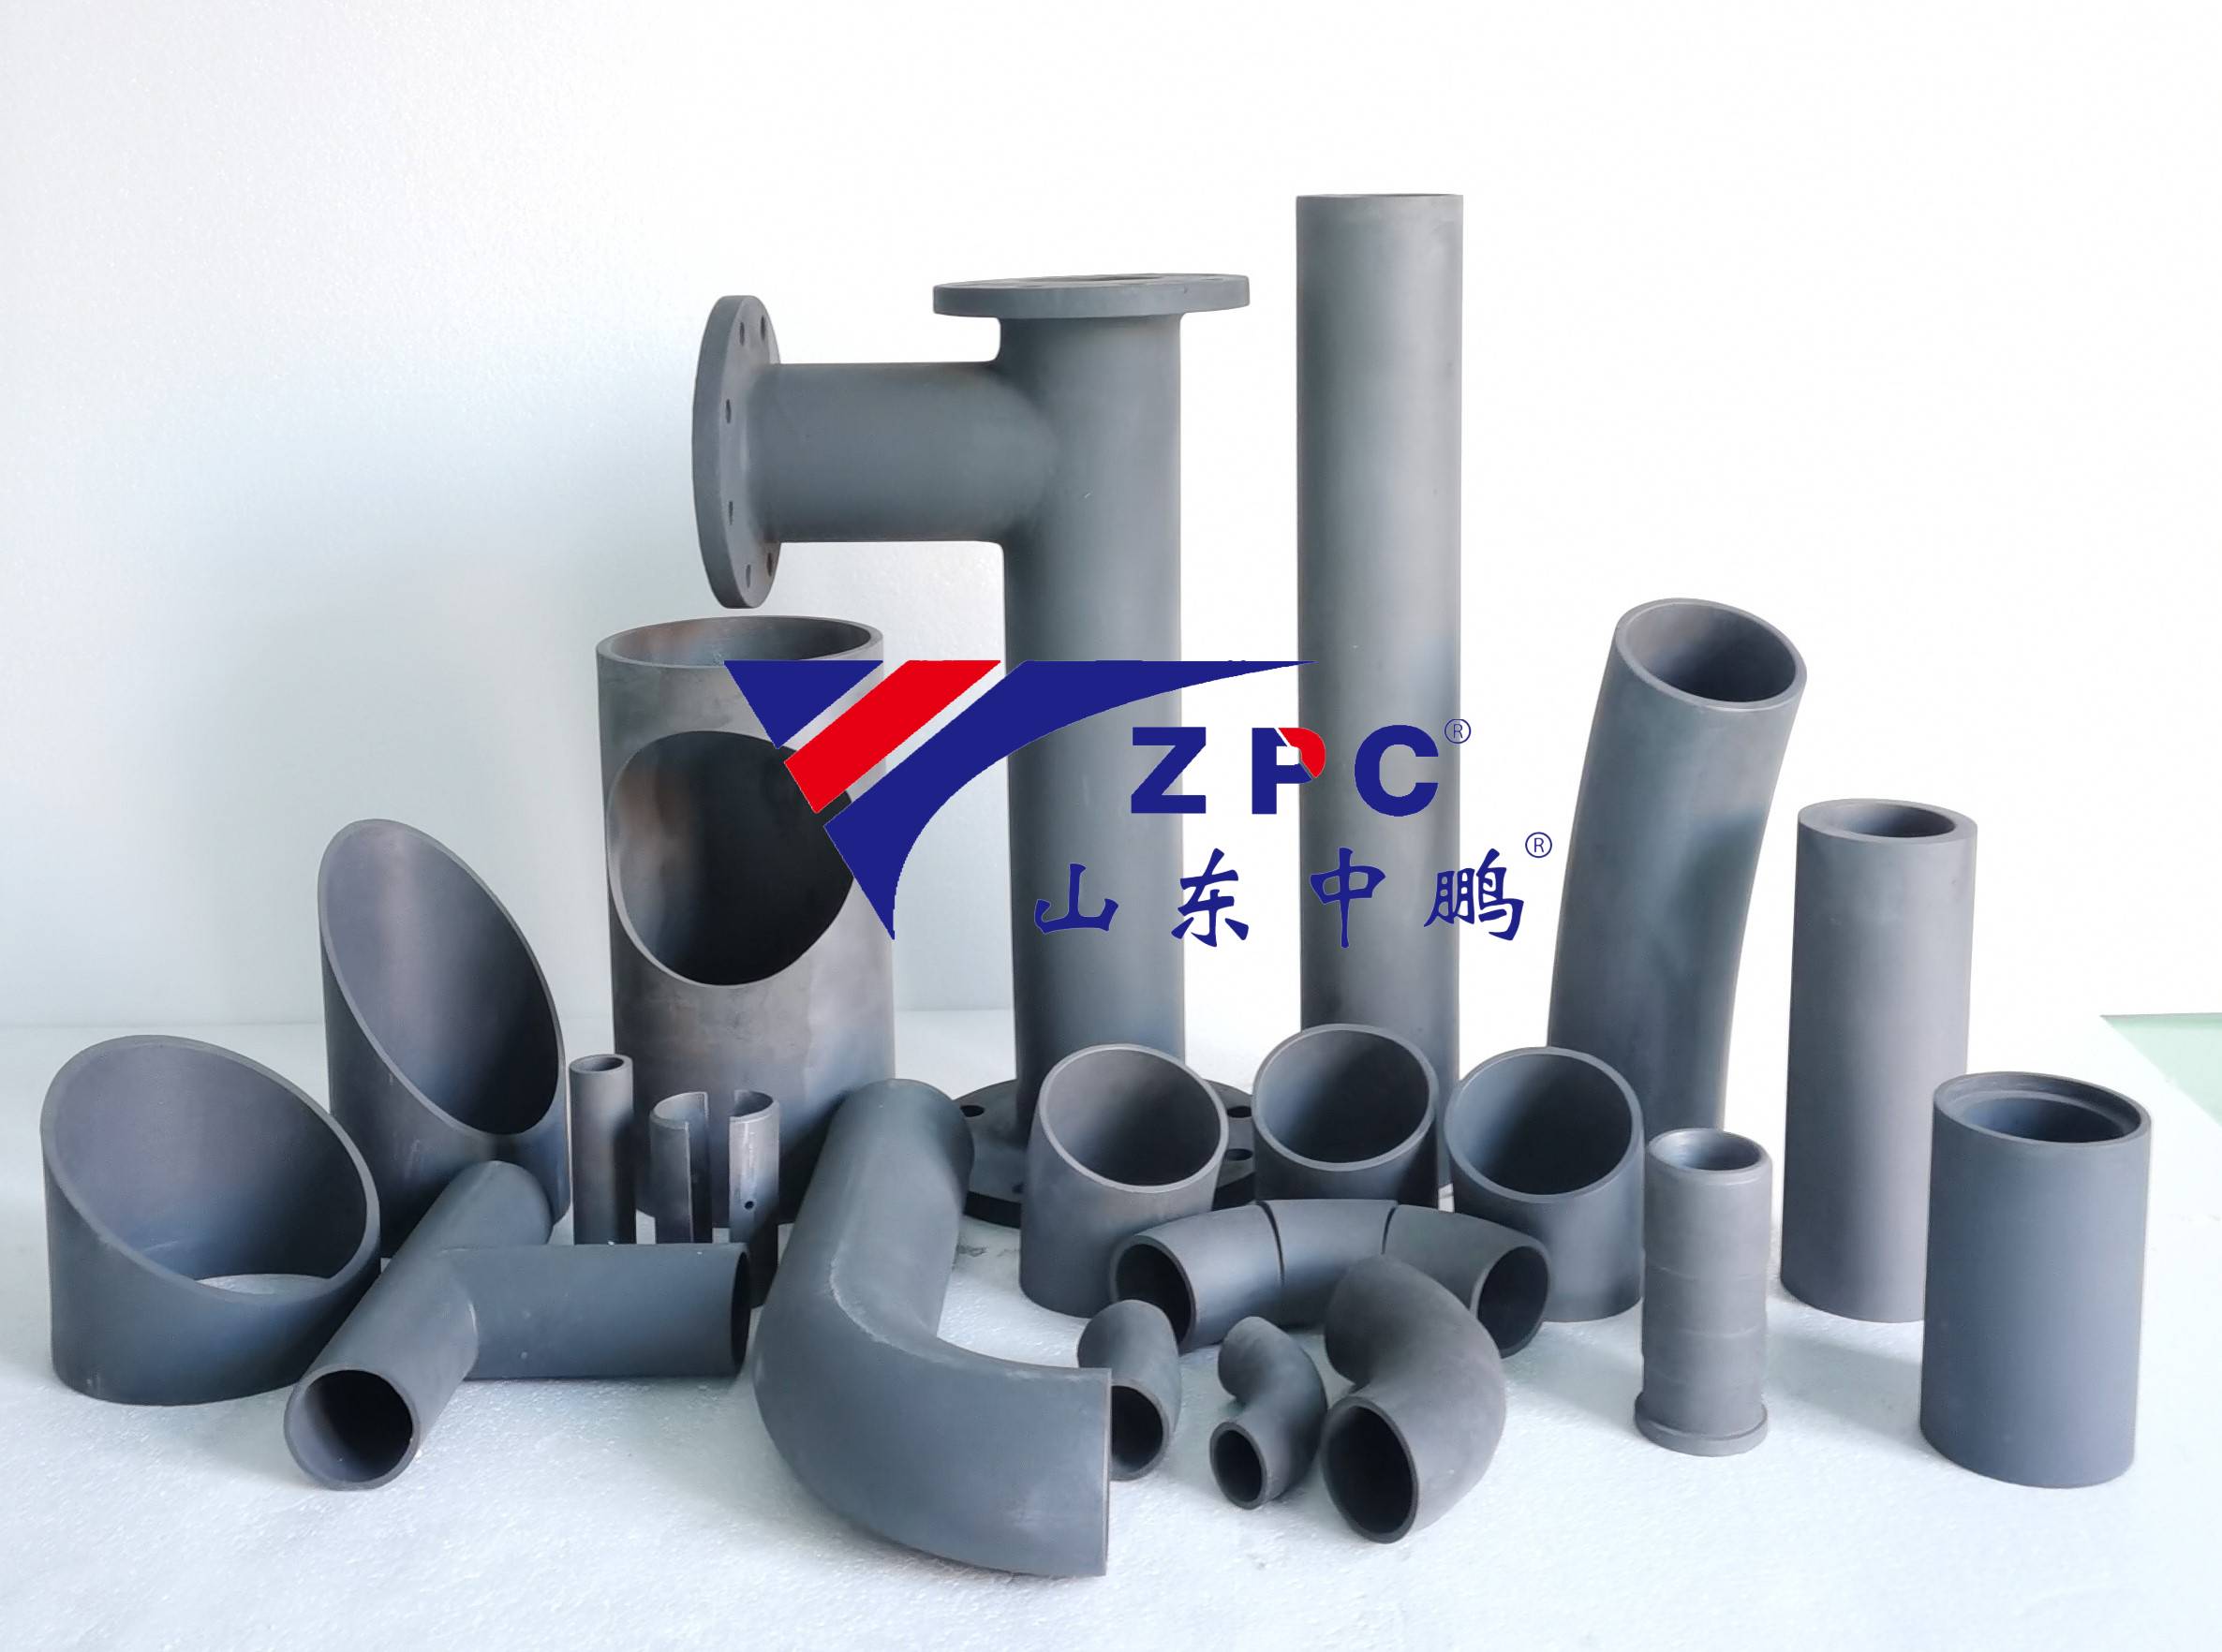 China Manufacturer for Aluminum Radiant Floor Heat -
 Wear resistant and corrosion resistant silicon carbide ceramic pipe – ZhongPeng